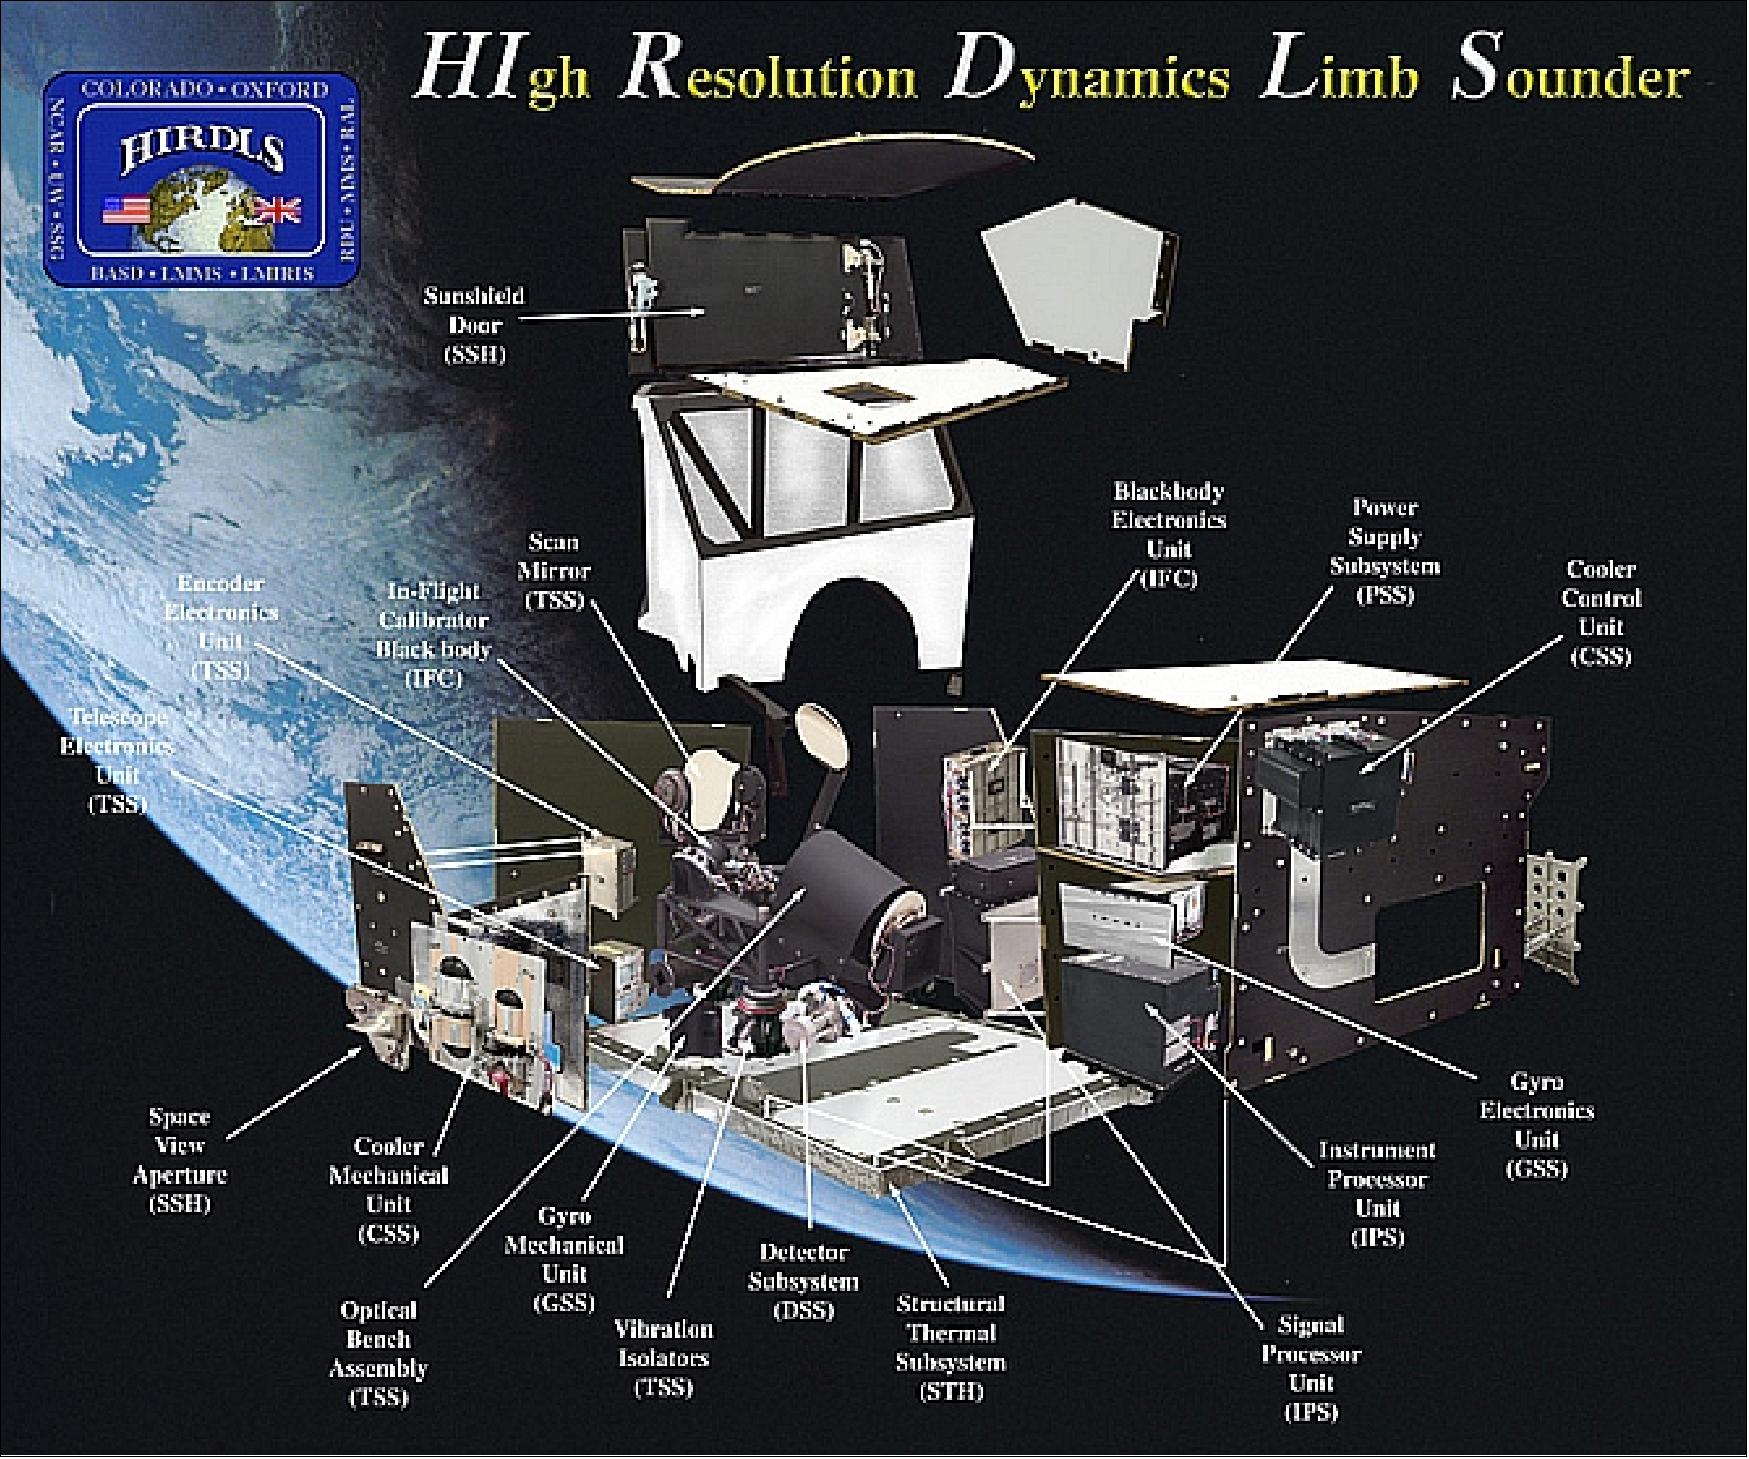 Figure 53: Illustration of the HIRDLS instrument and its components (image credit: UCAR, Ref. 66)